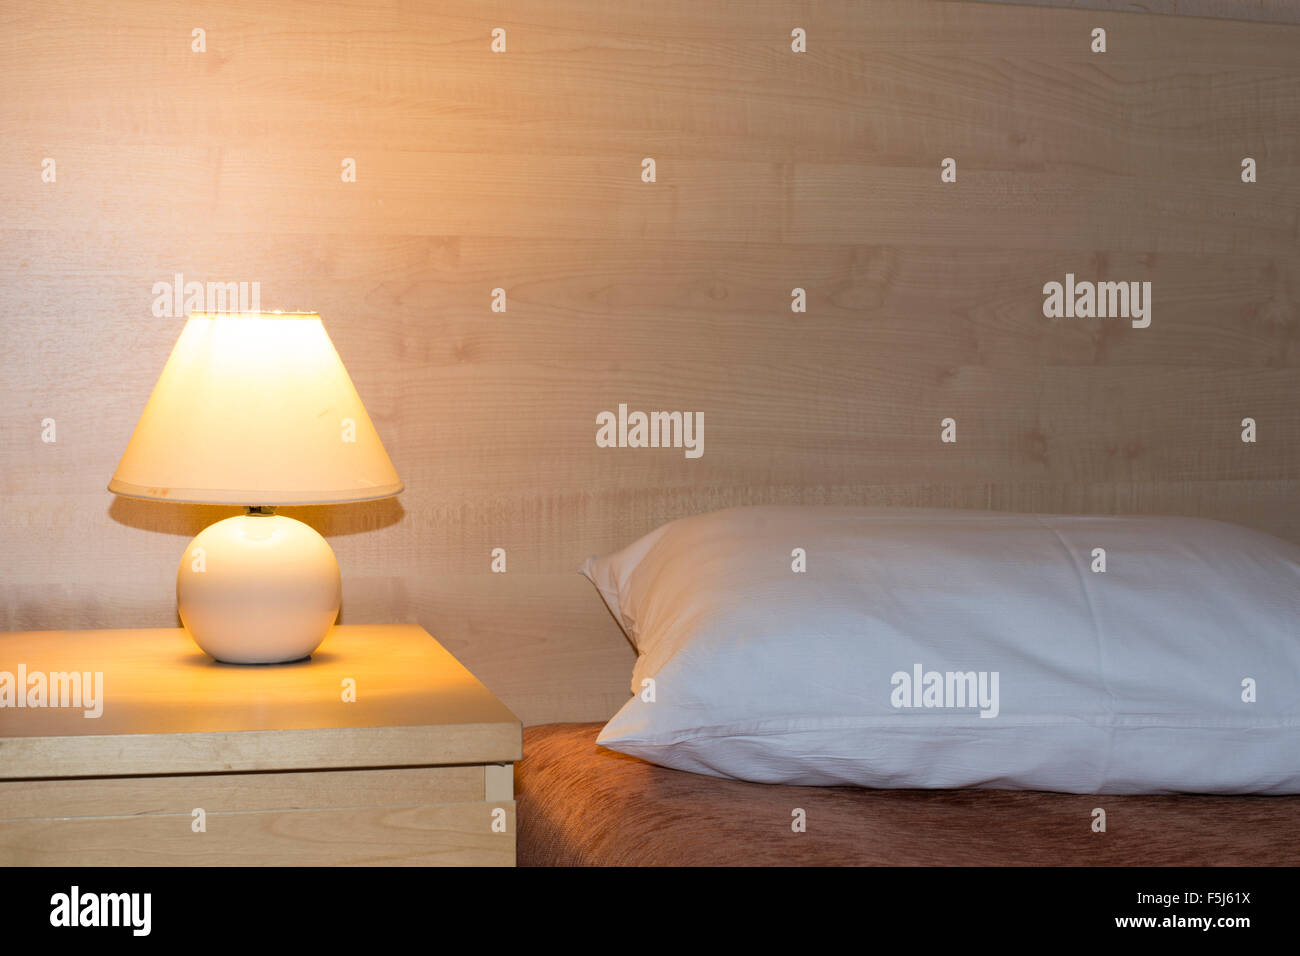 simple room interior with illuminated bed light on wooden table and focus on pillow Stock Photo